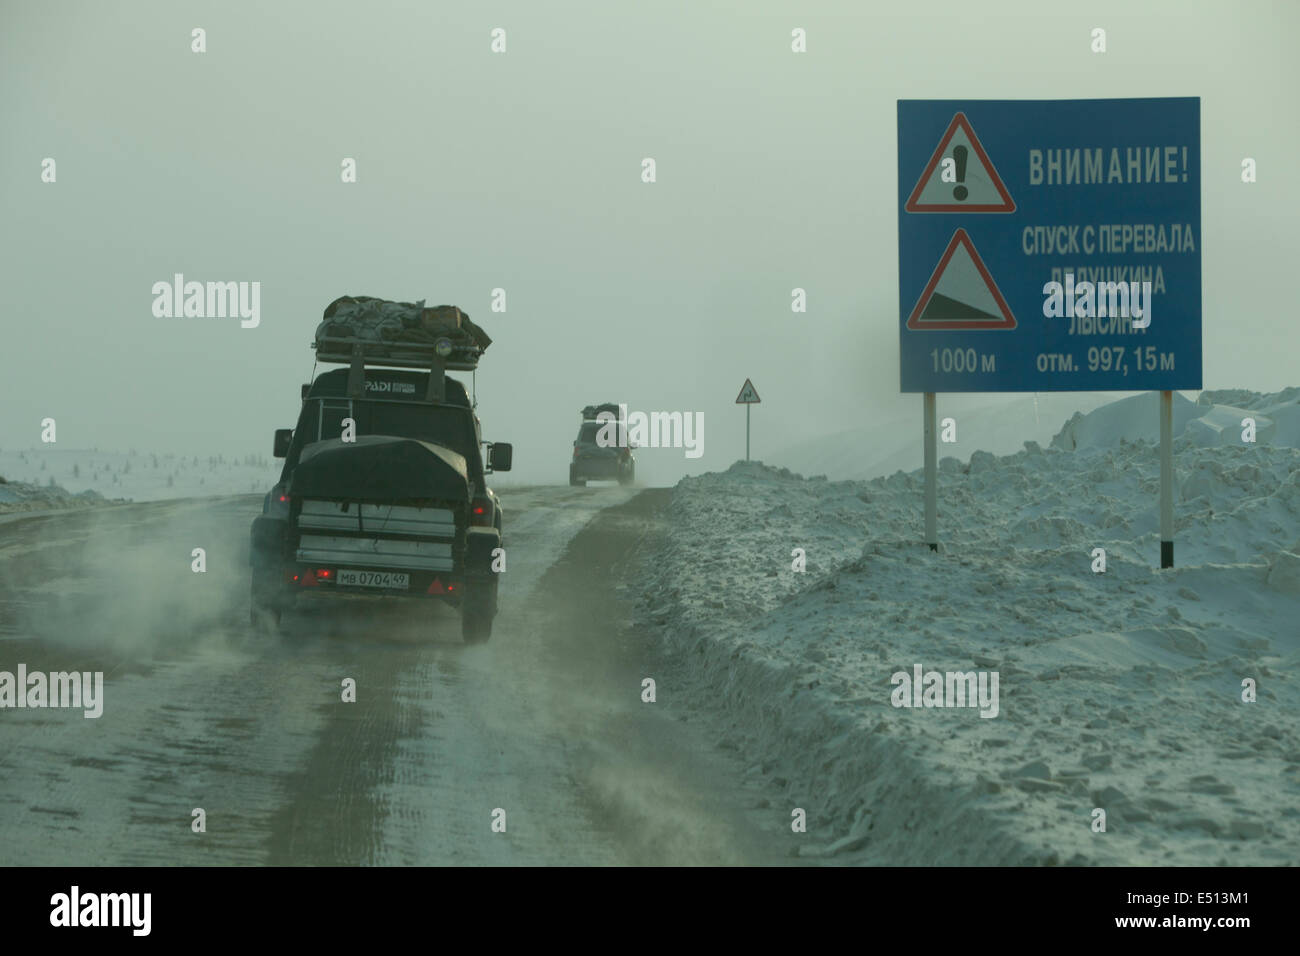 4WD expedition dangerous road sign Siberia snow Stock Photo